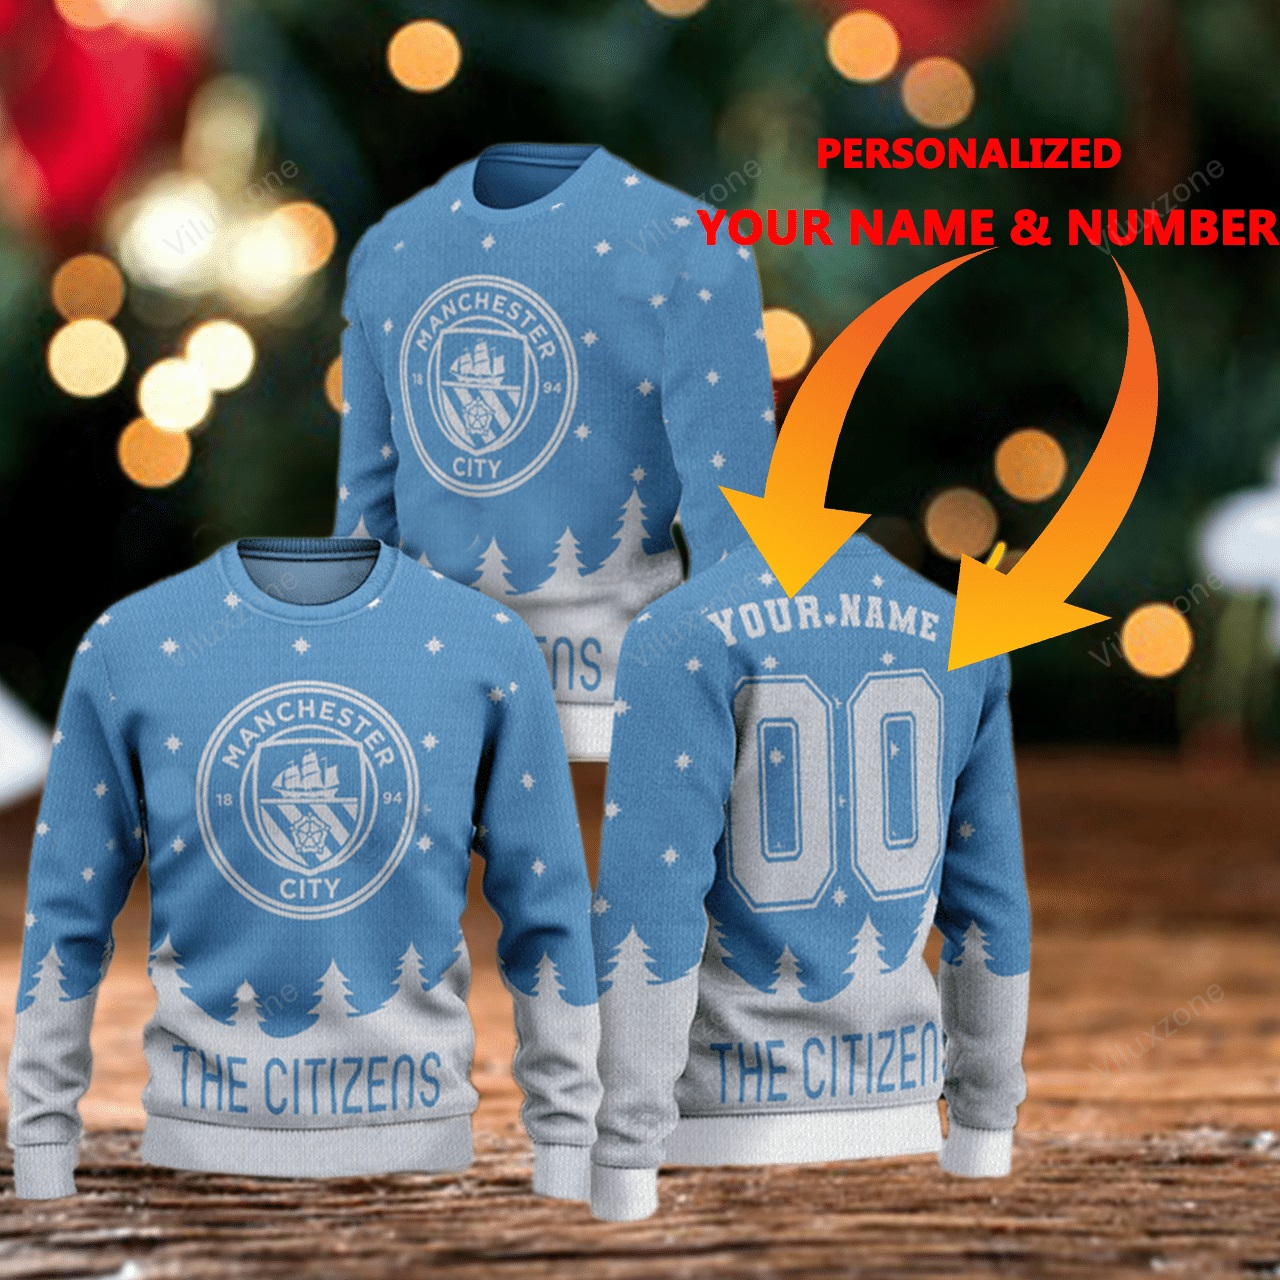 [ Amazing ] Manchester City FC The Citizens personalized name and number 3d xmas sweater – Saleoff 251121